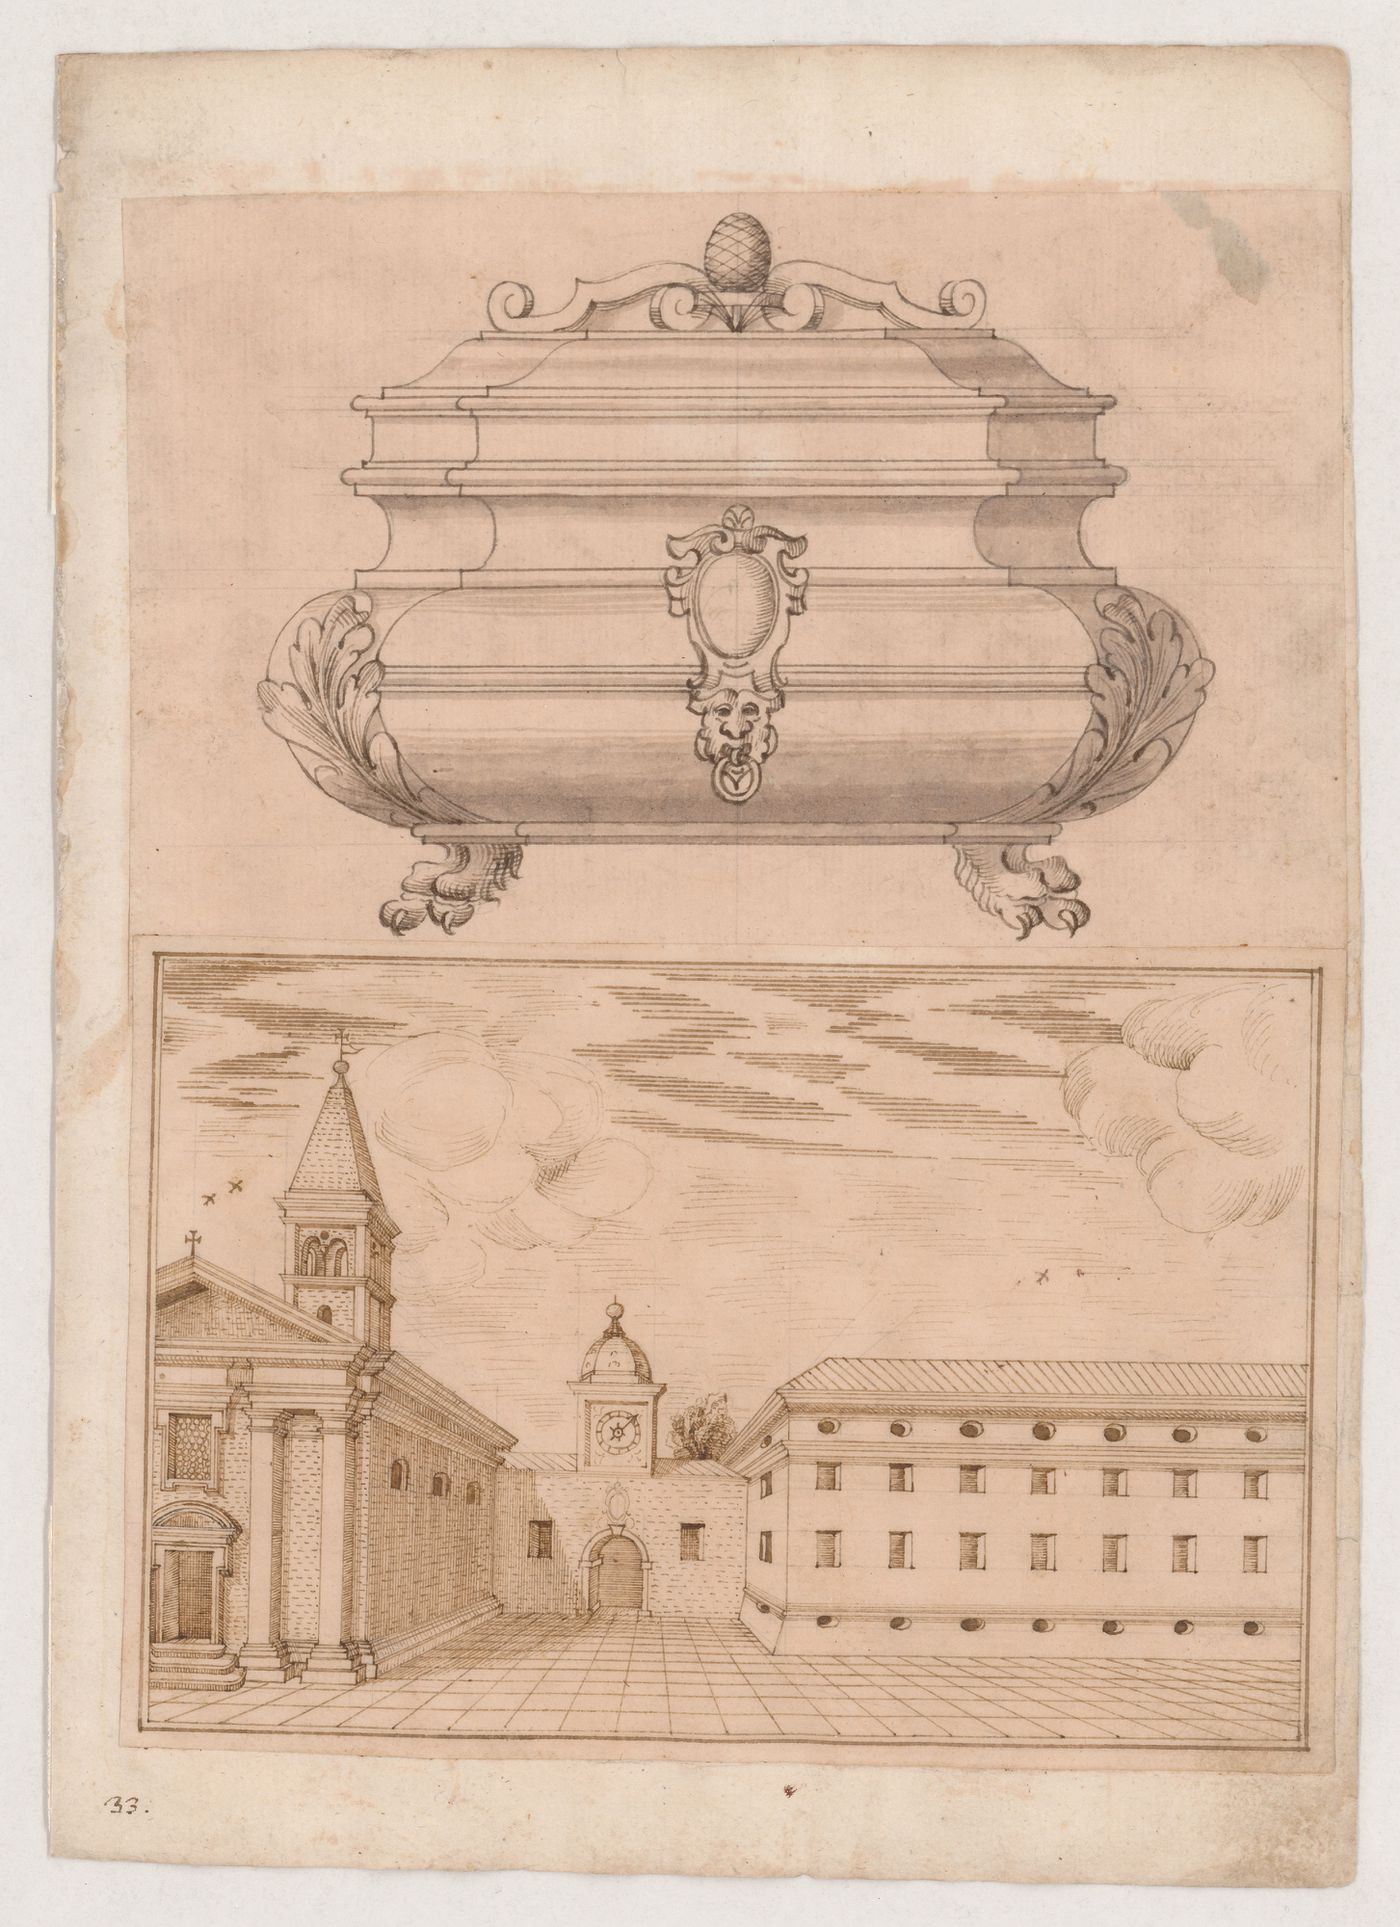 Elevation of a chest; View of a piazza with a church and clock tower; verso: Bird's-eye view of three buildings on a canal near Comacchio; Elevation of a domed tower